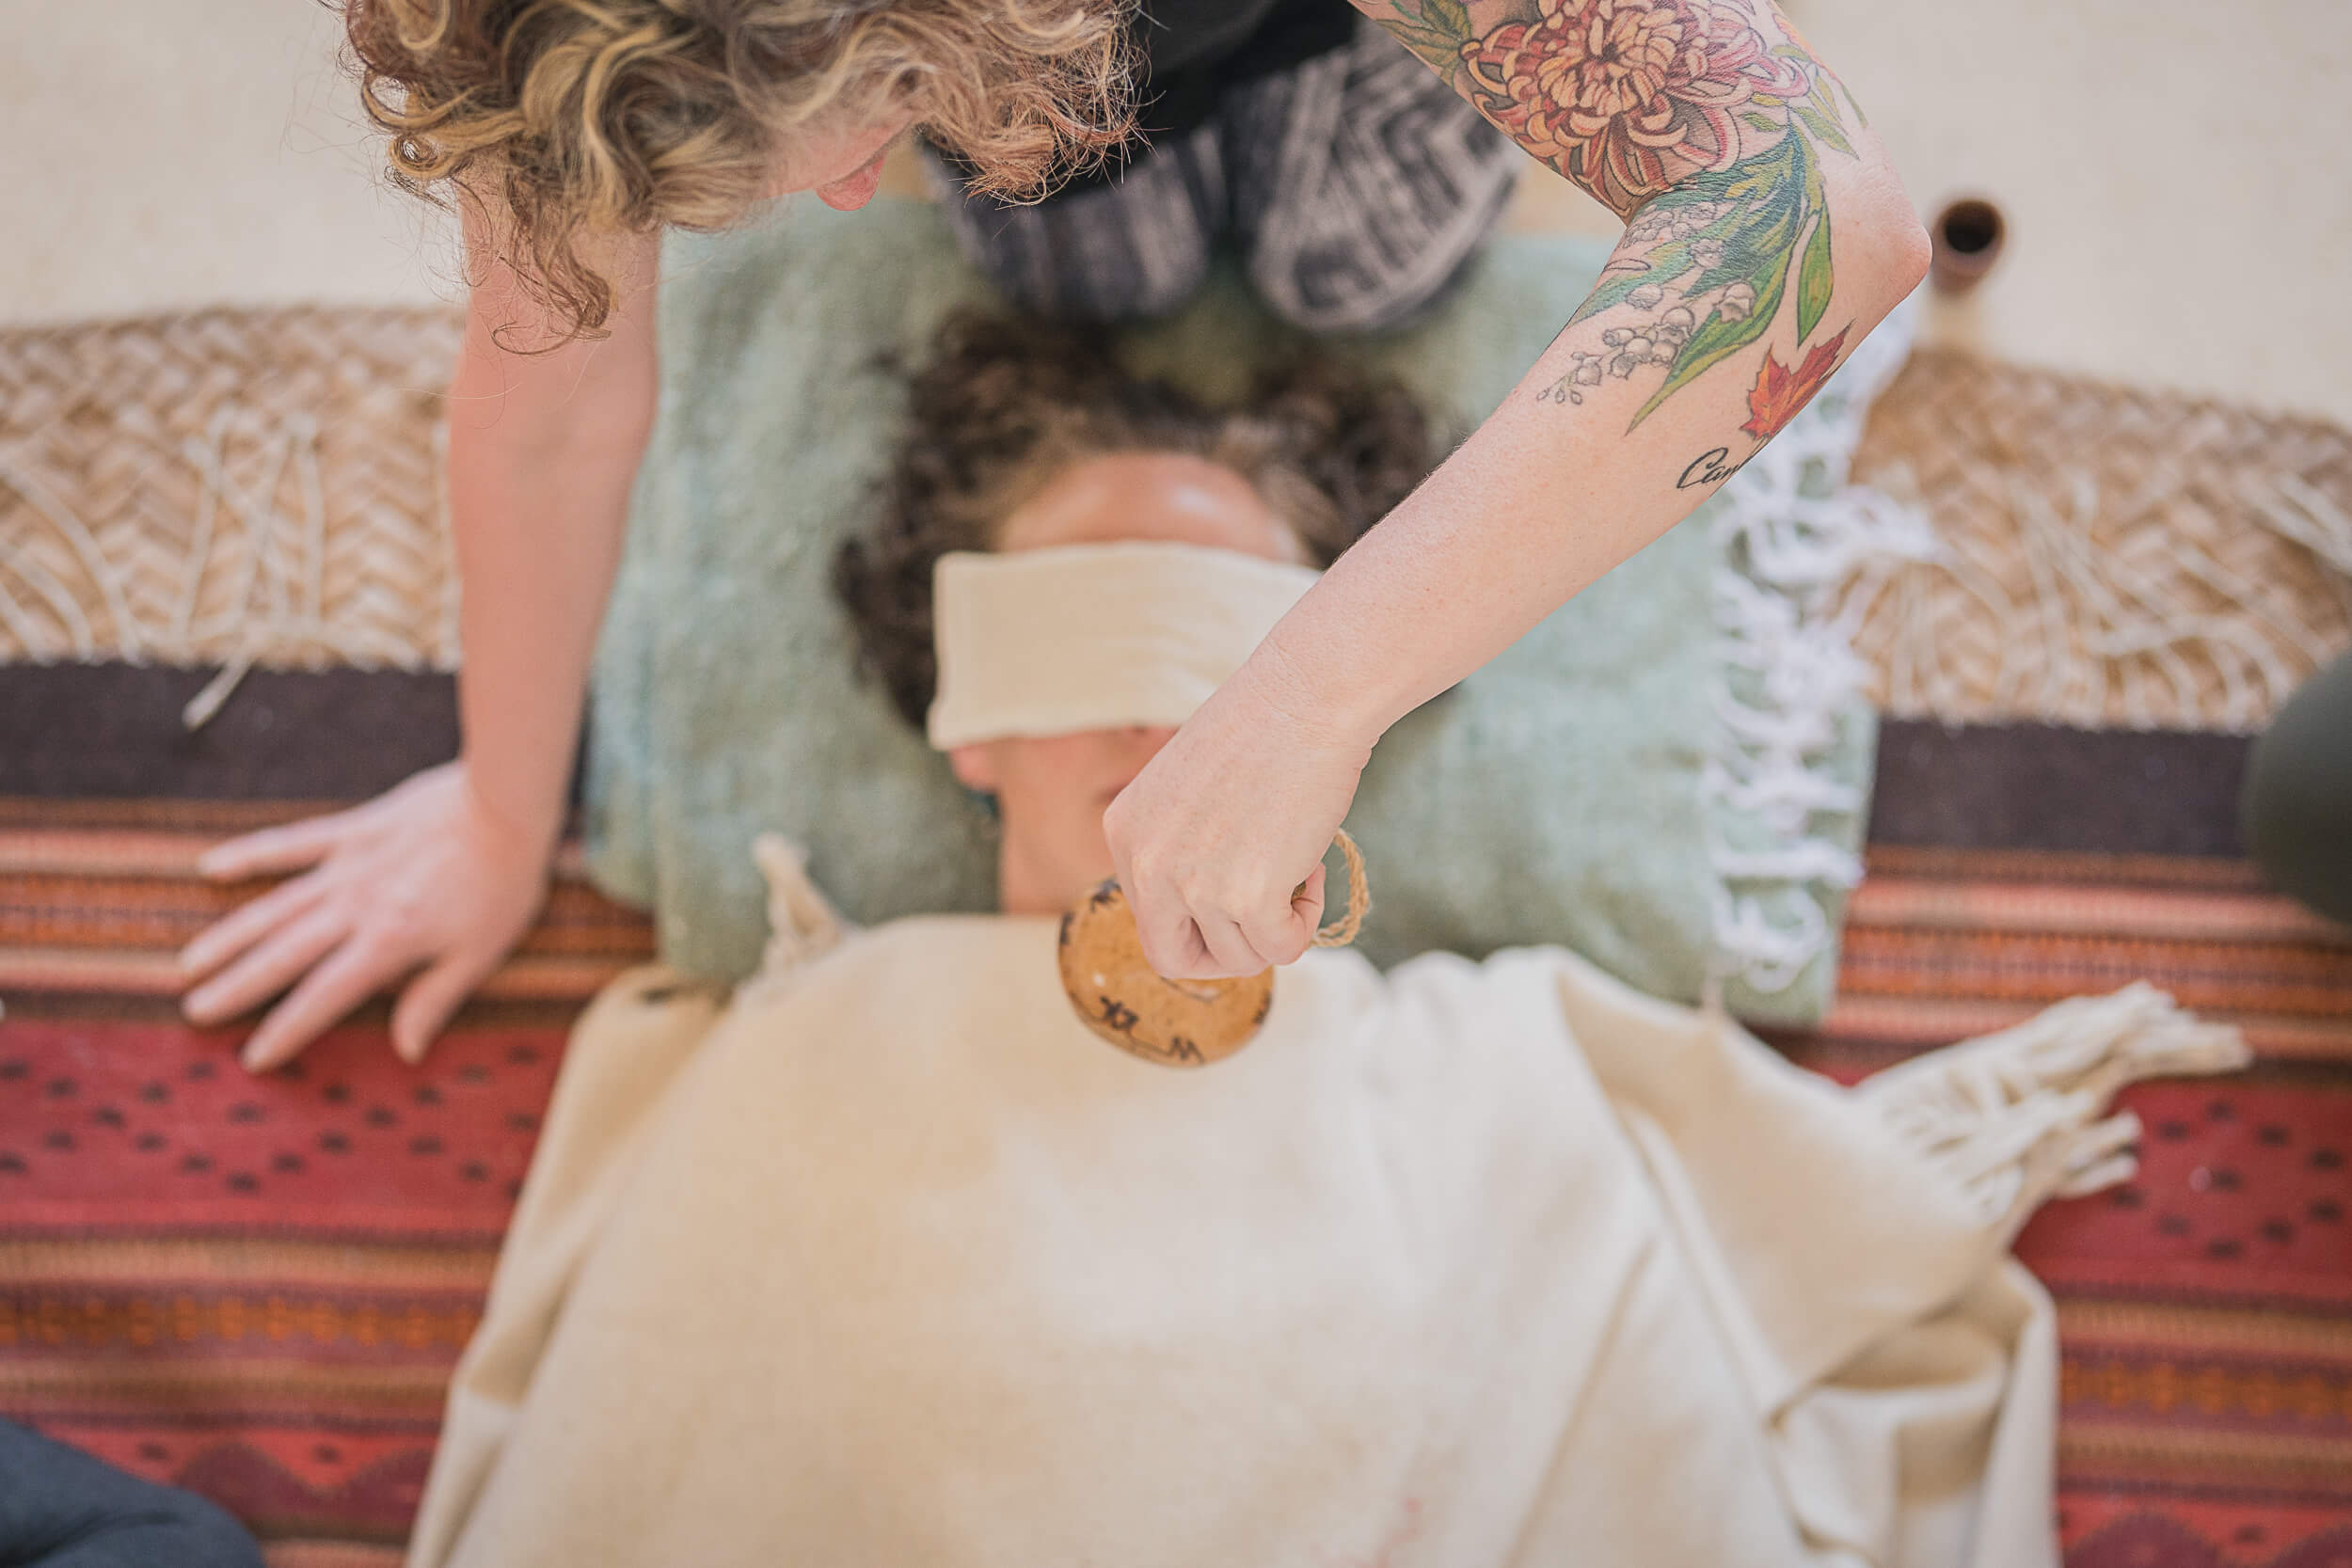 Lifestyle photographer captures a top-down view of a sound healing session with a woman receiving therapy through a singing bowl, highlighting the therapist's tattooed arm.